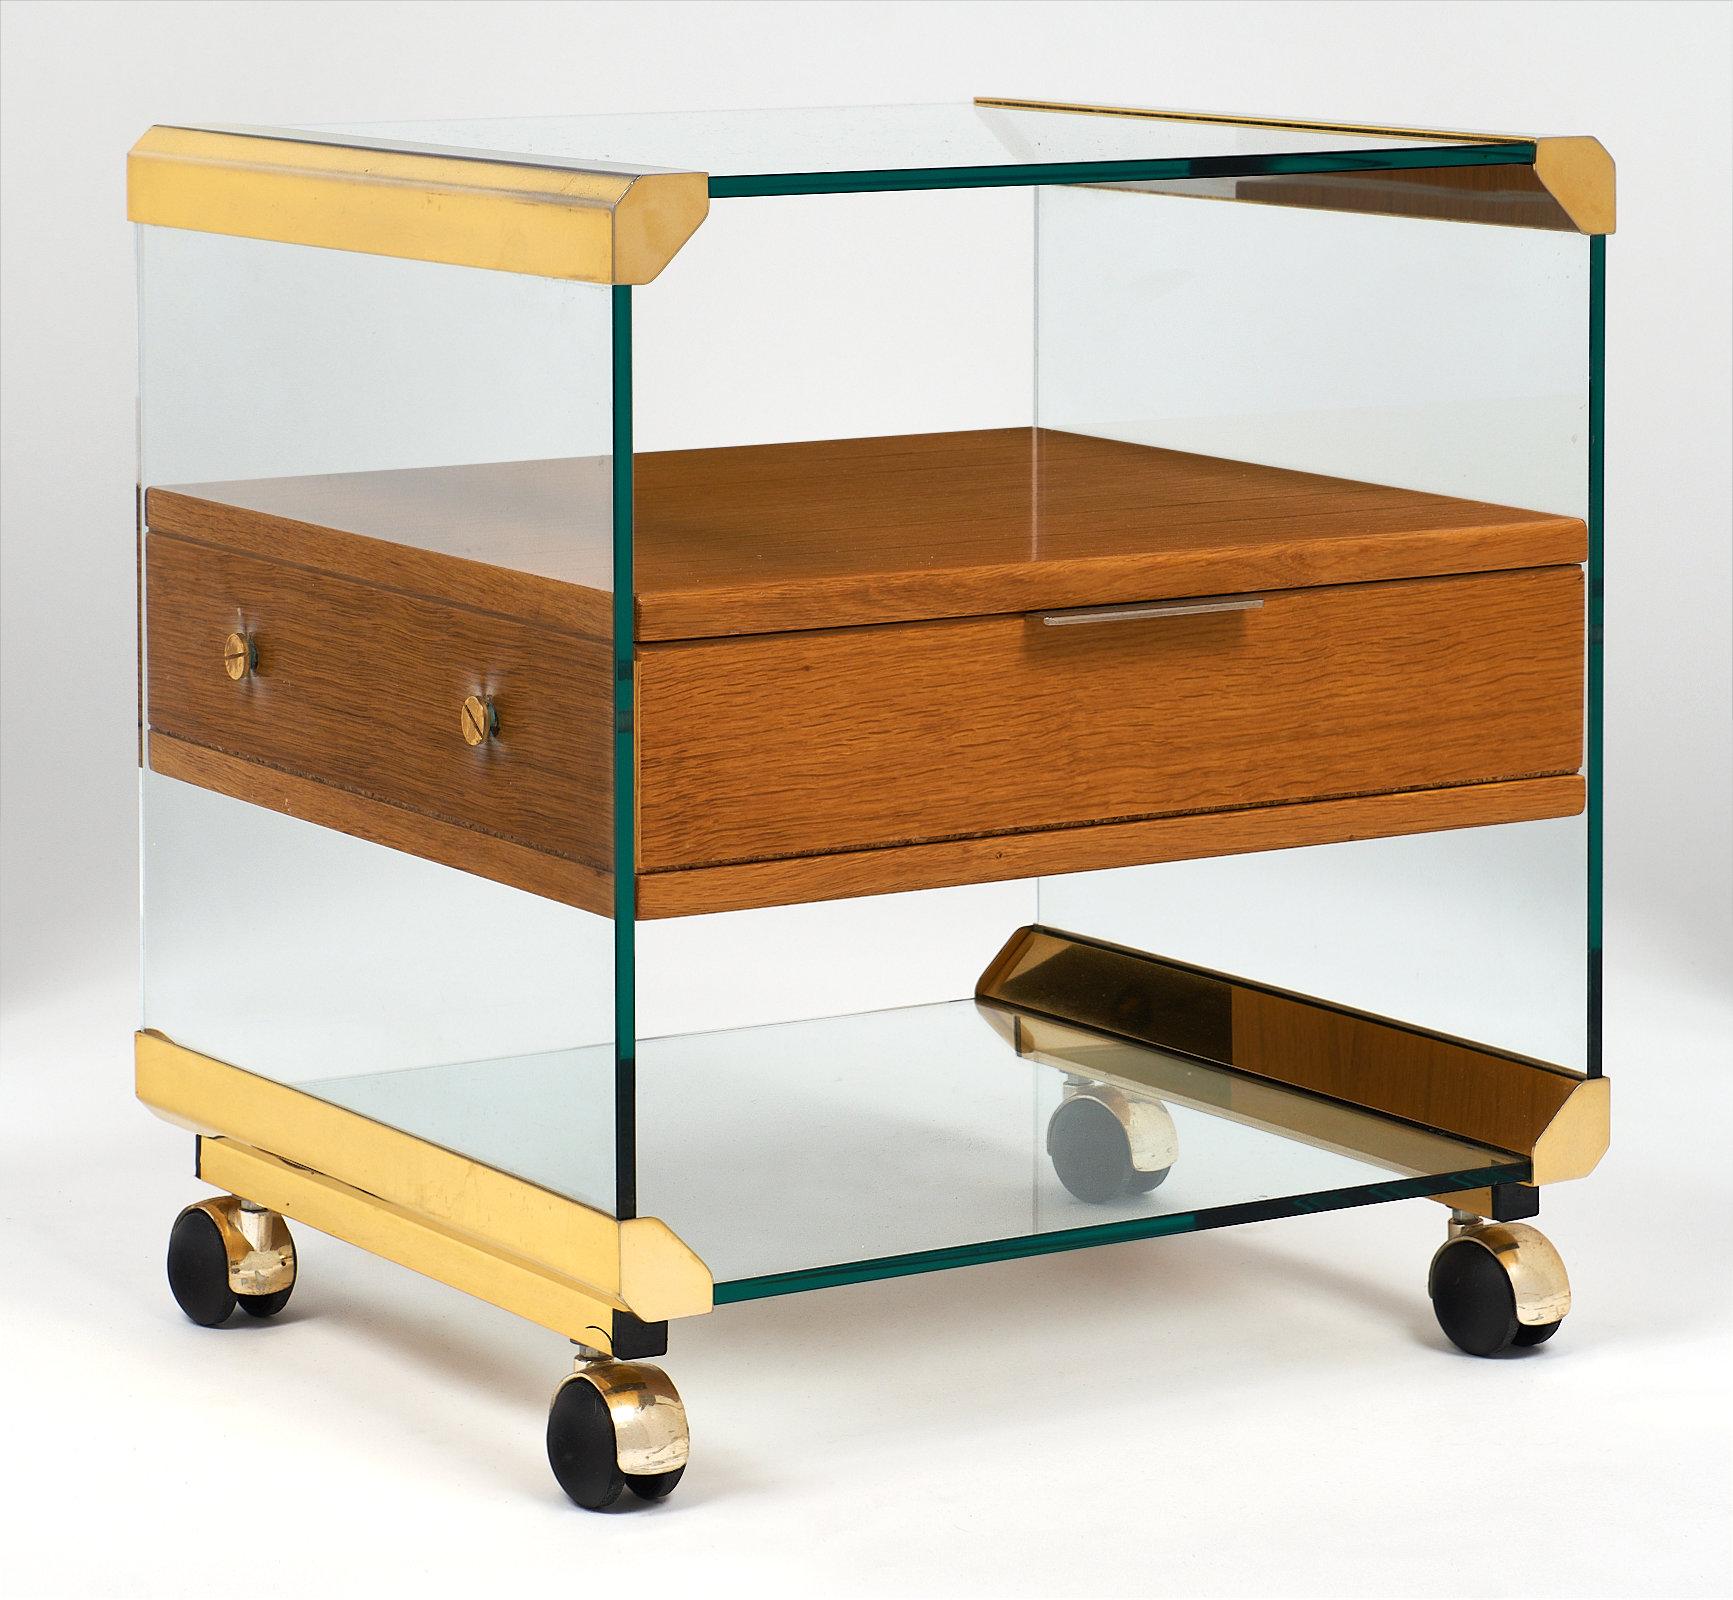 A fun brass and glass modernist side table or nightstand featuring one dovetailed drawer. There is a glass structure encasing the rosewood drawer cabinetry, and brass hardware though out. Four casters support this great piece!